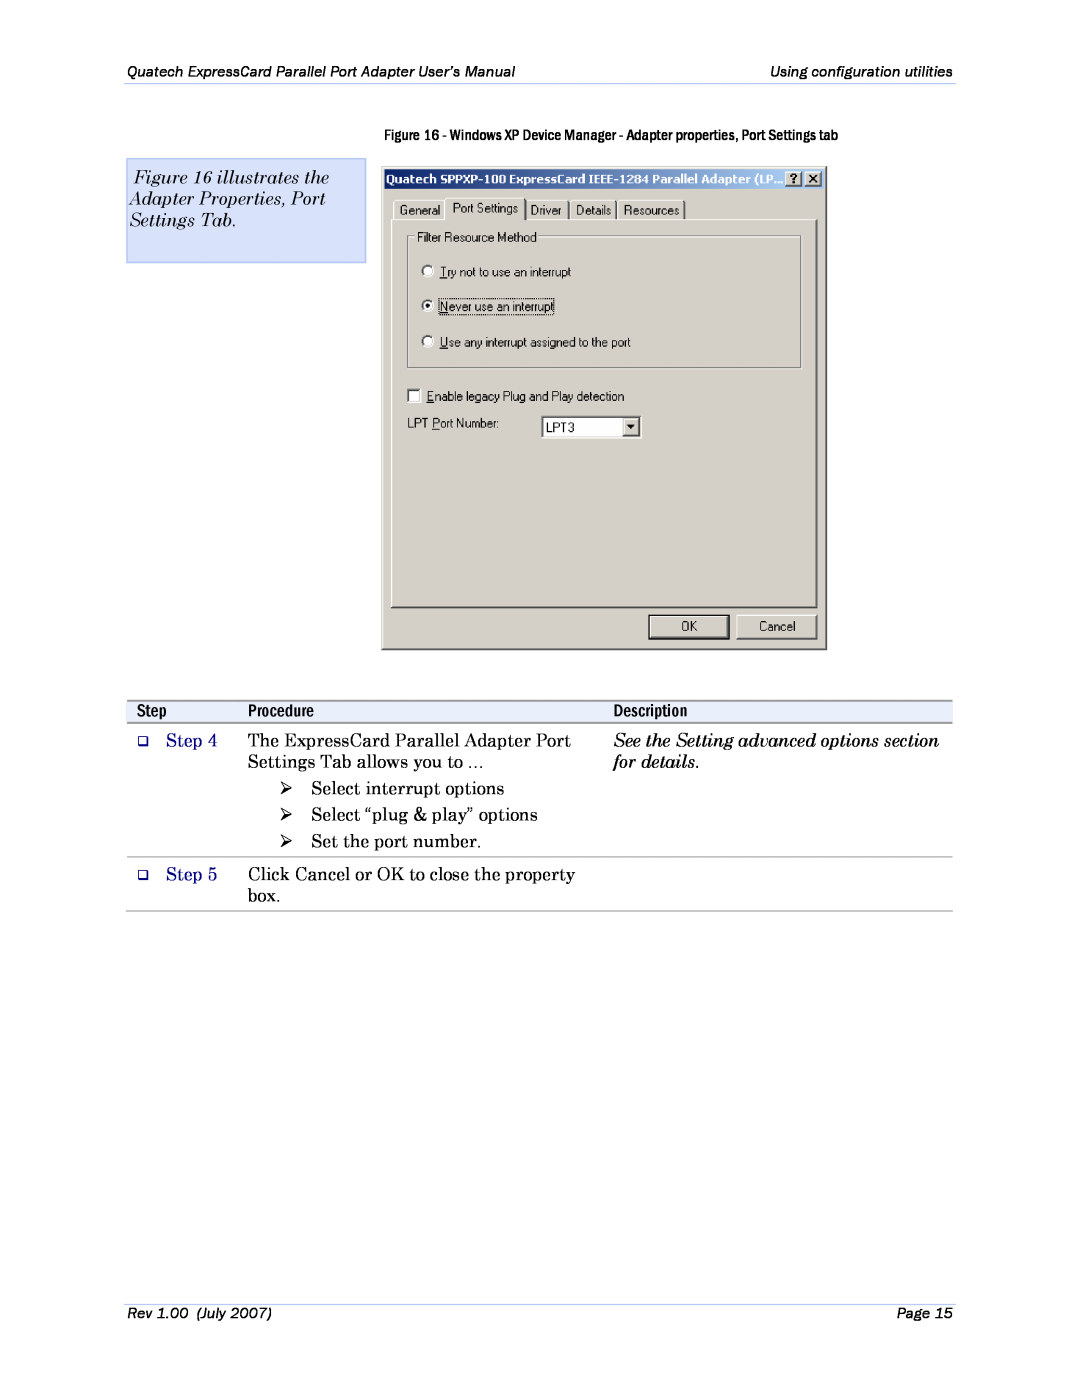 Quatech SPPXP-100 illustrates the Adapter Properties, Port Settings Tab, See the Setting advanced options section, Step 